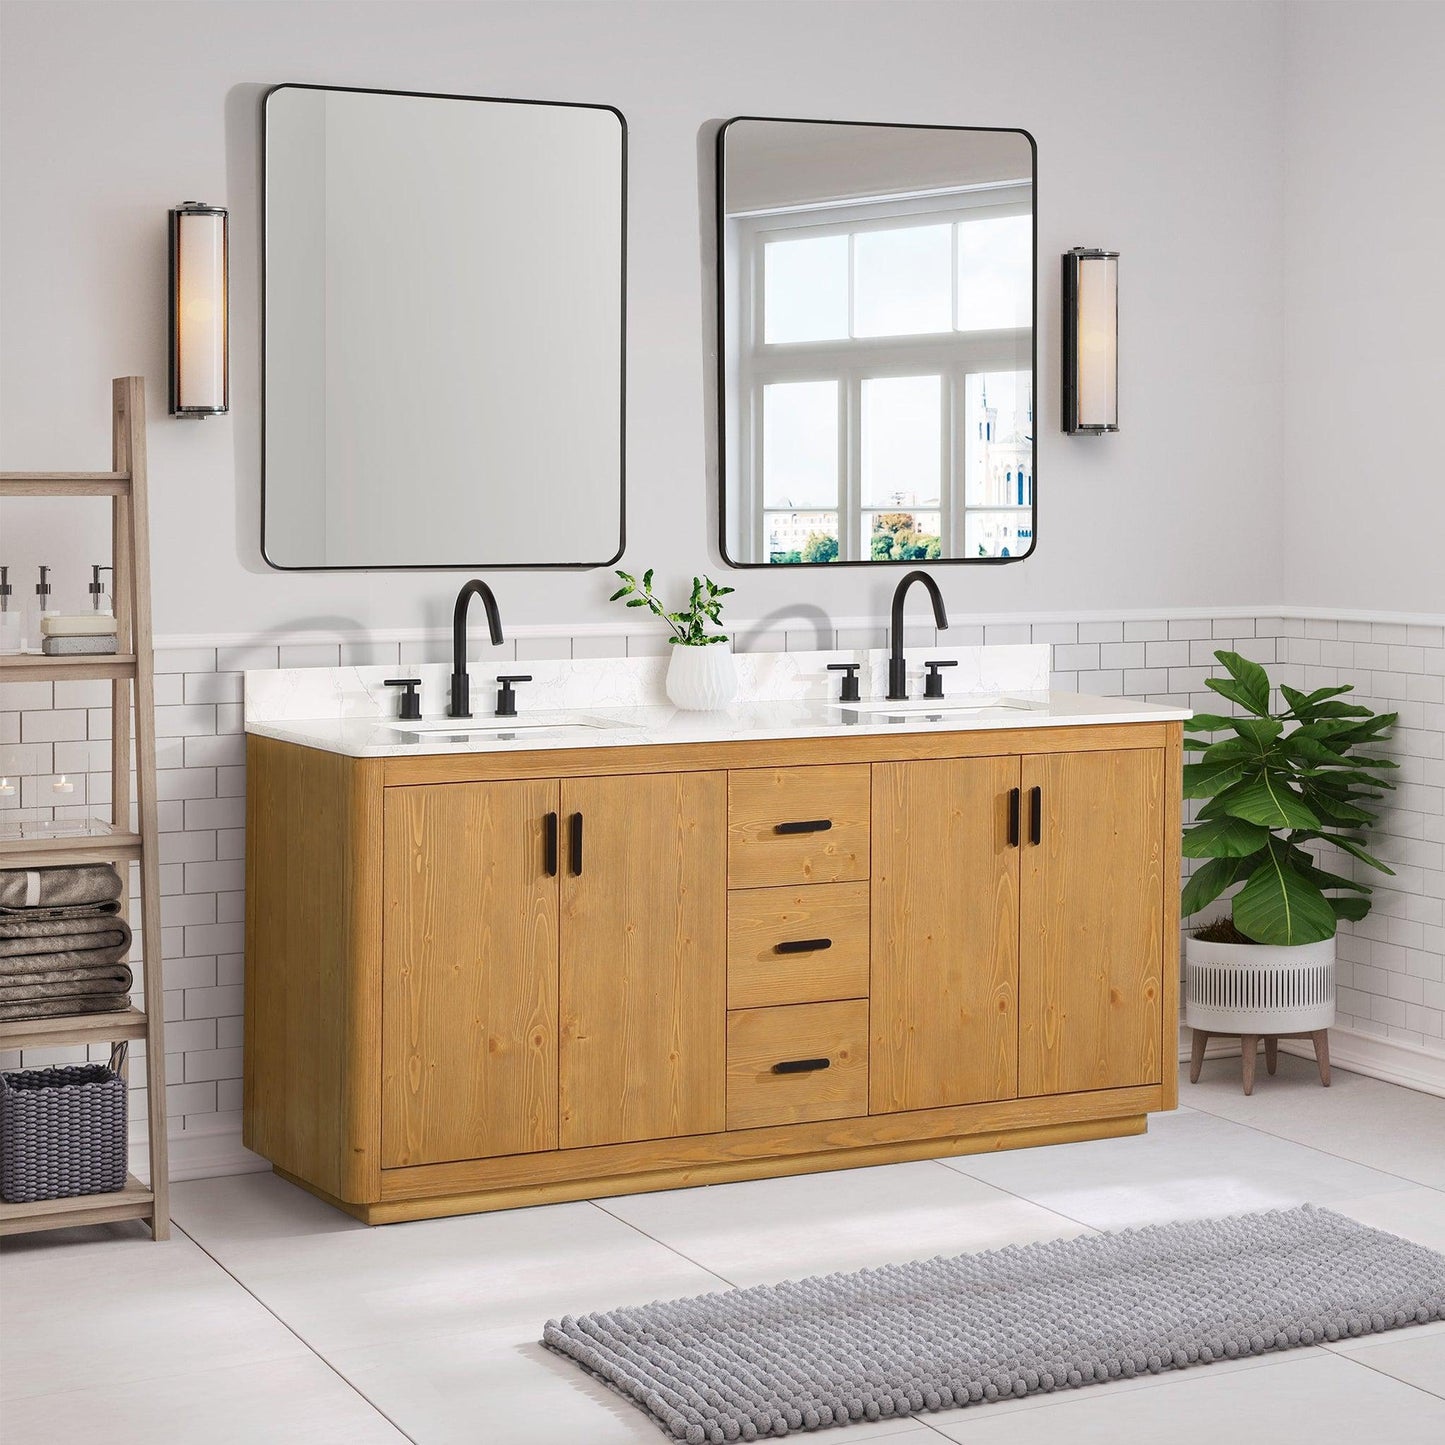 Altair Perla 72" Natural Wood Freestanding Double Bathroom Vanity Set With Mirror, Grain White Composite Stone Top, Two Rectangular Undermount Ceramic Sinks, and Overflow